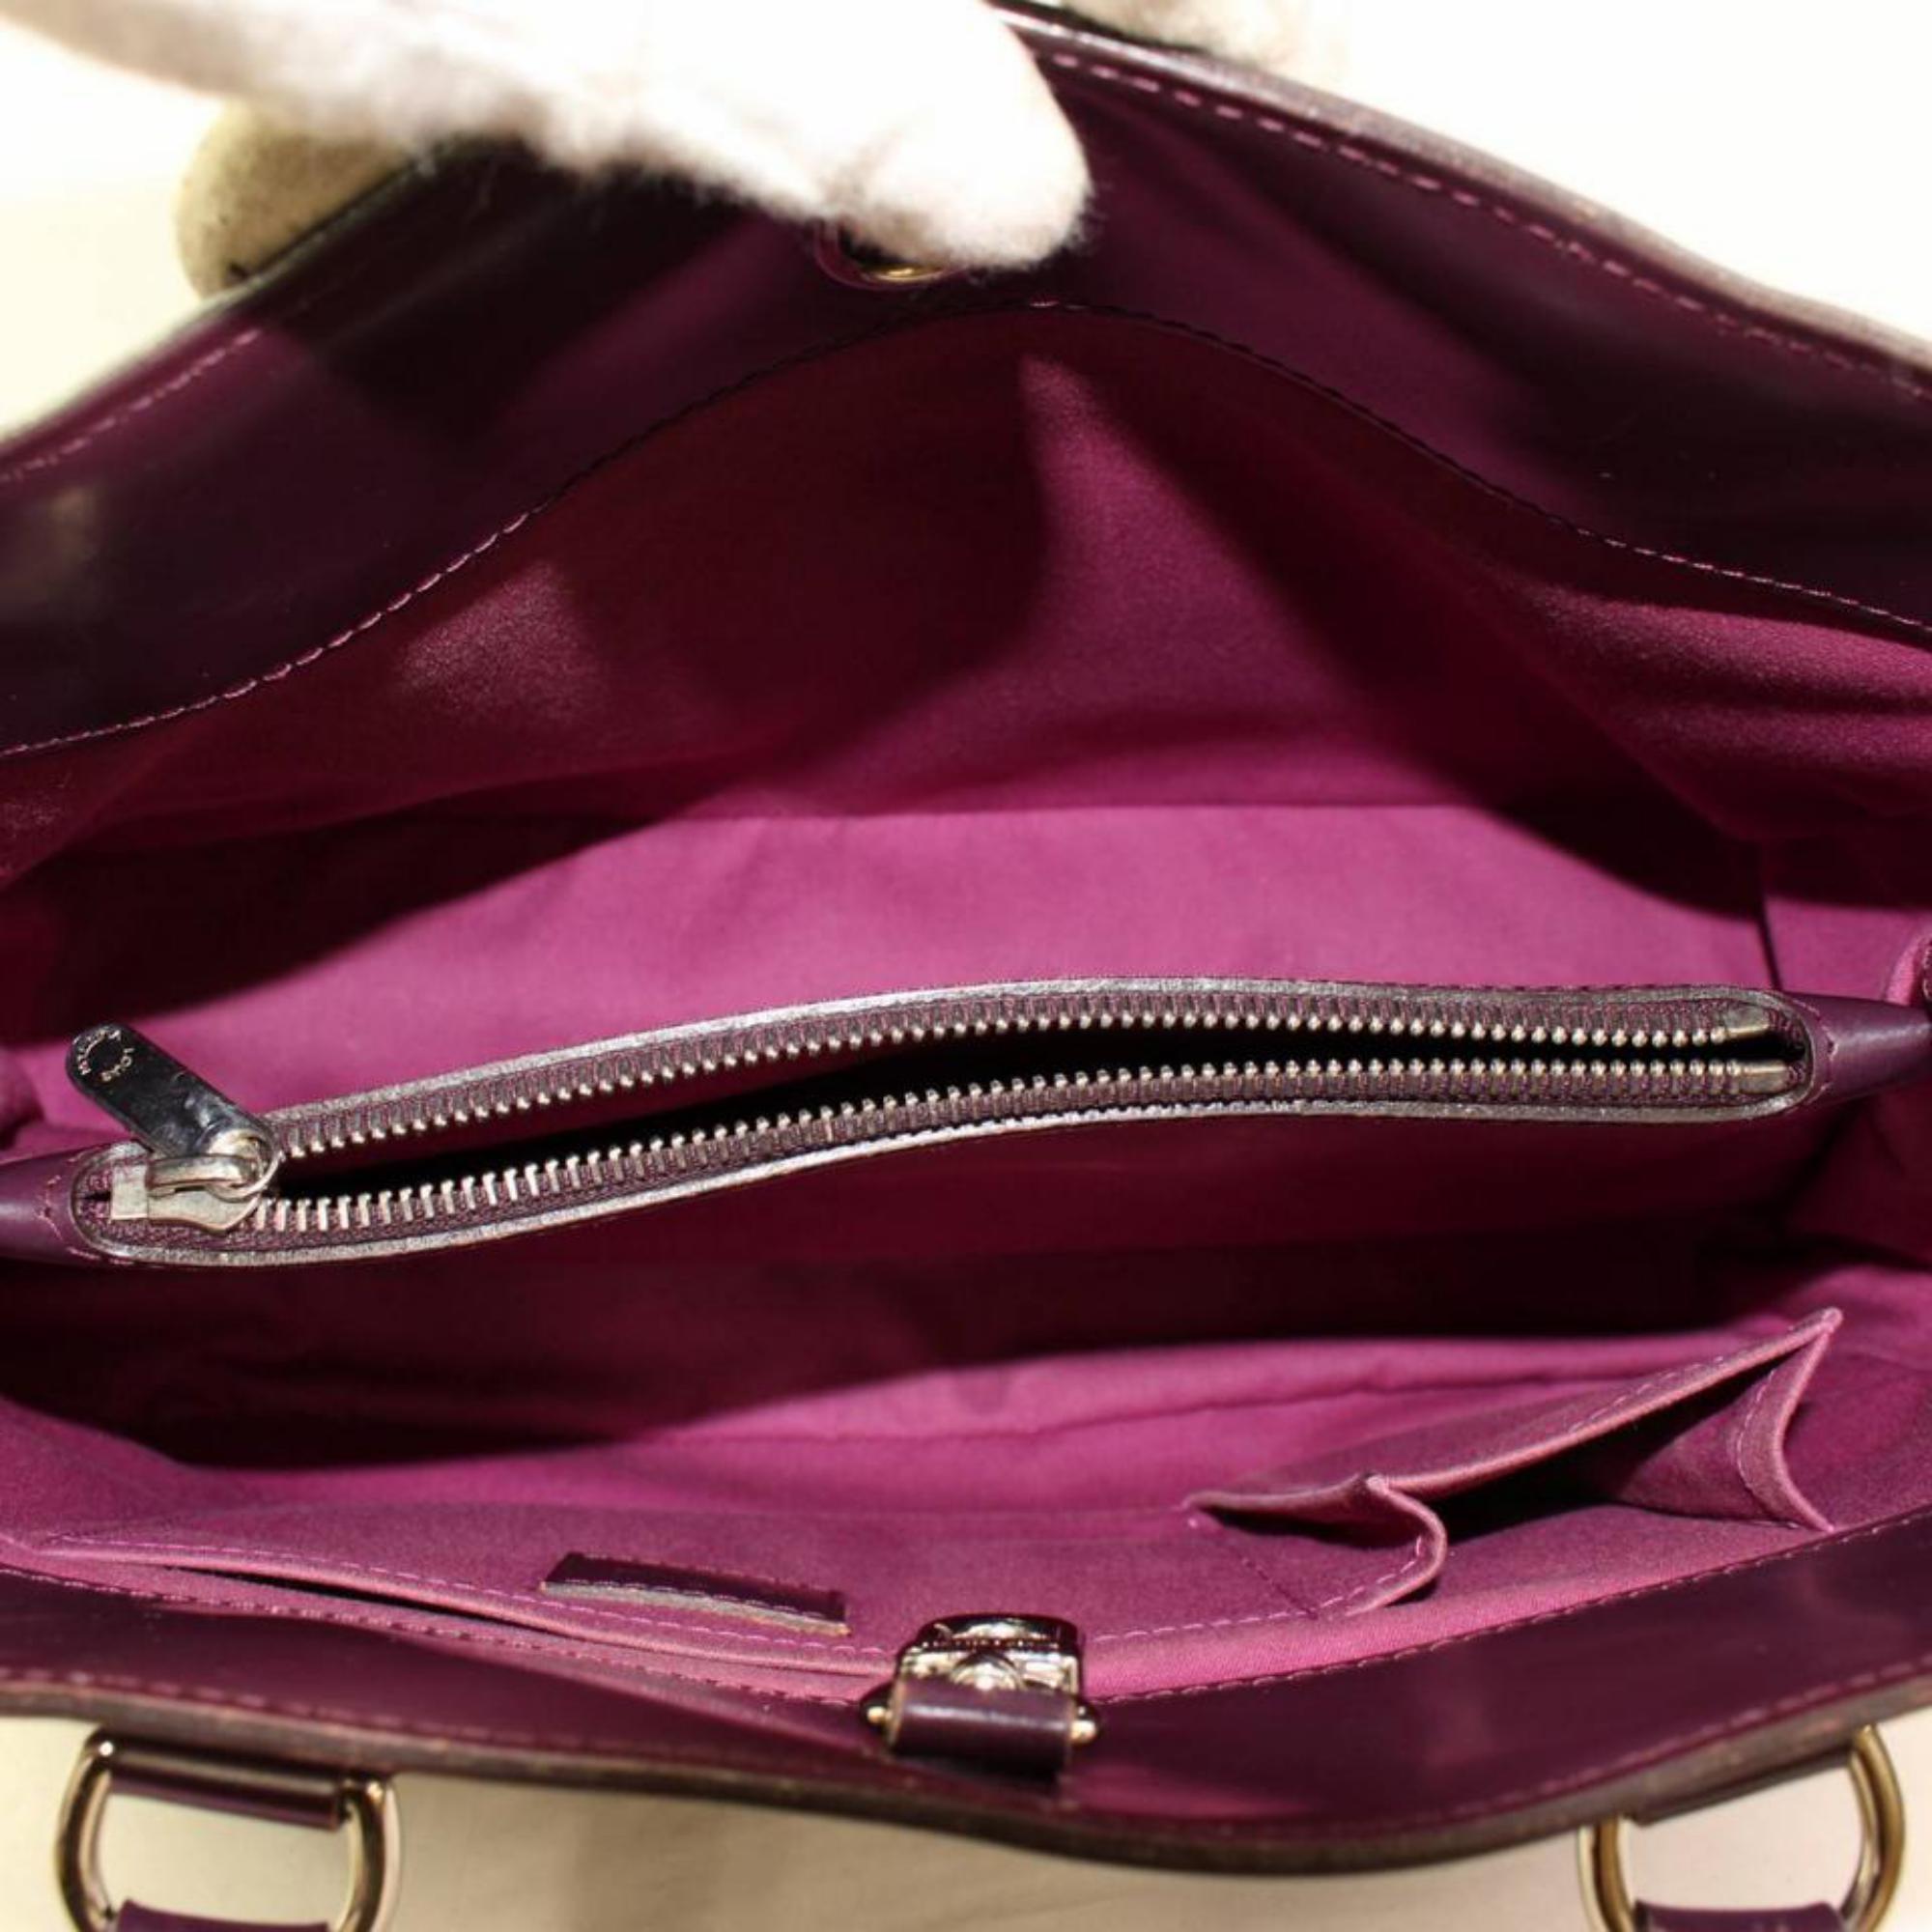 Louis Vuitton Passy Cassis Epi Pm 867138 Purple Leather Satchel In Good Condition For Sale In Forest Hills, NY